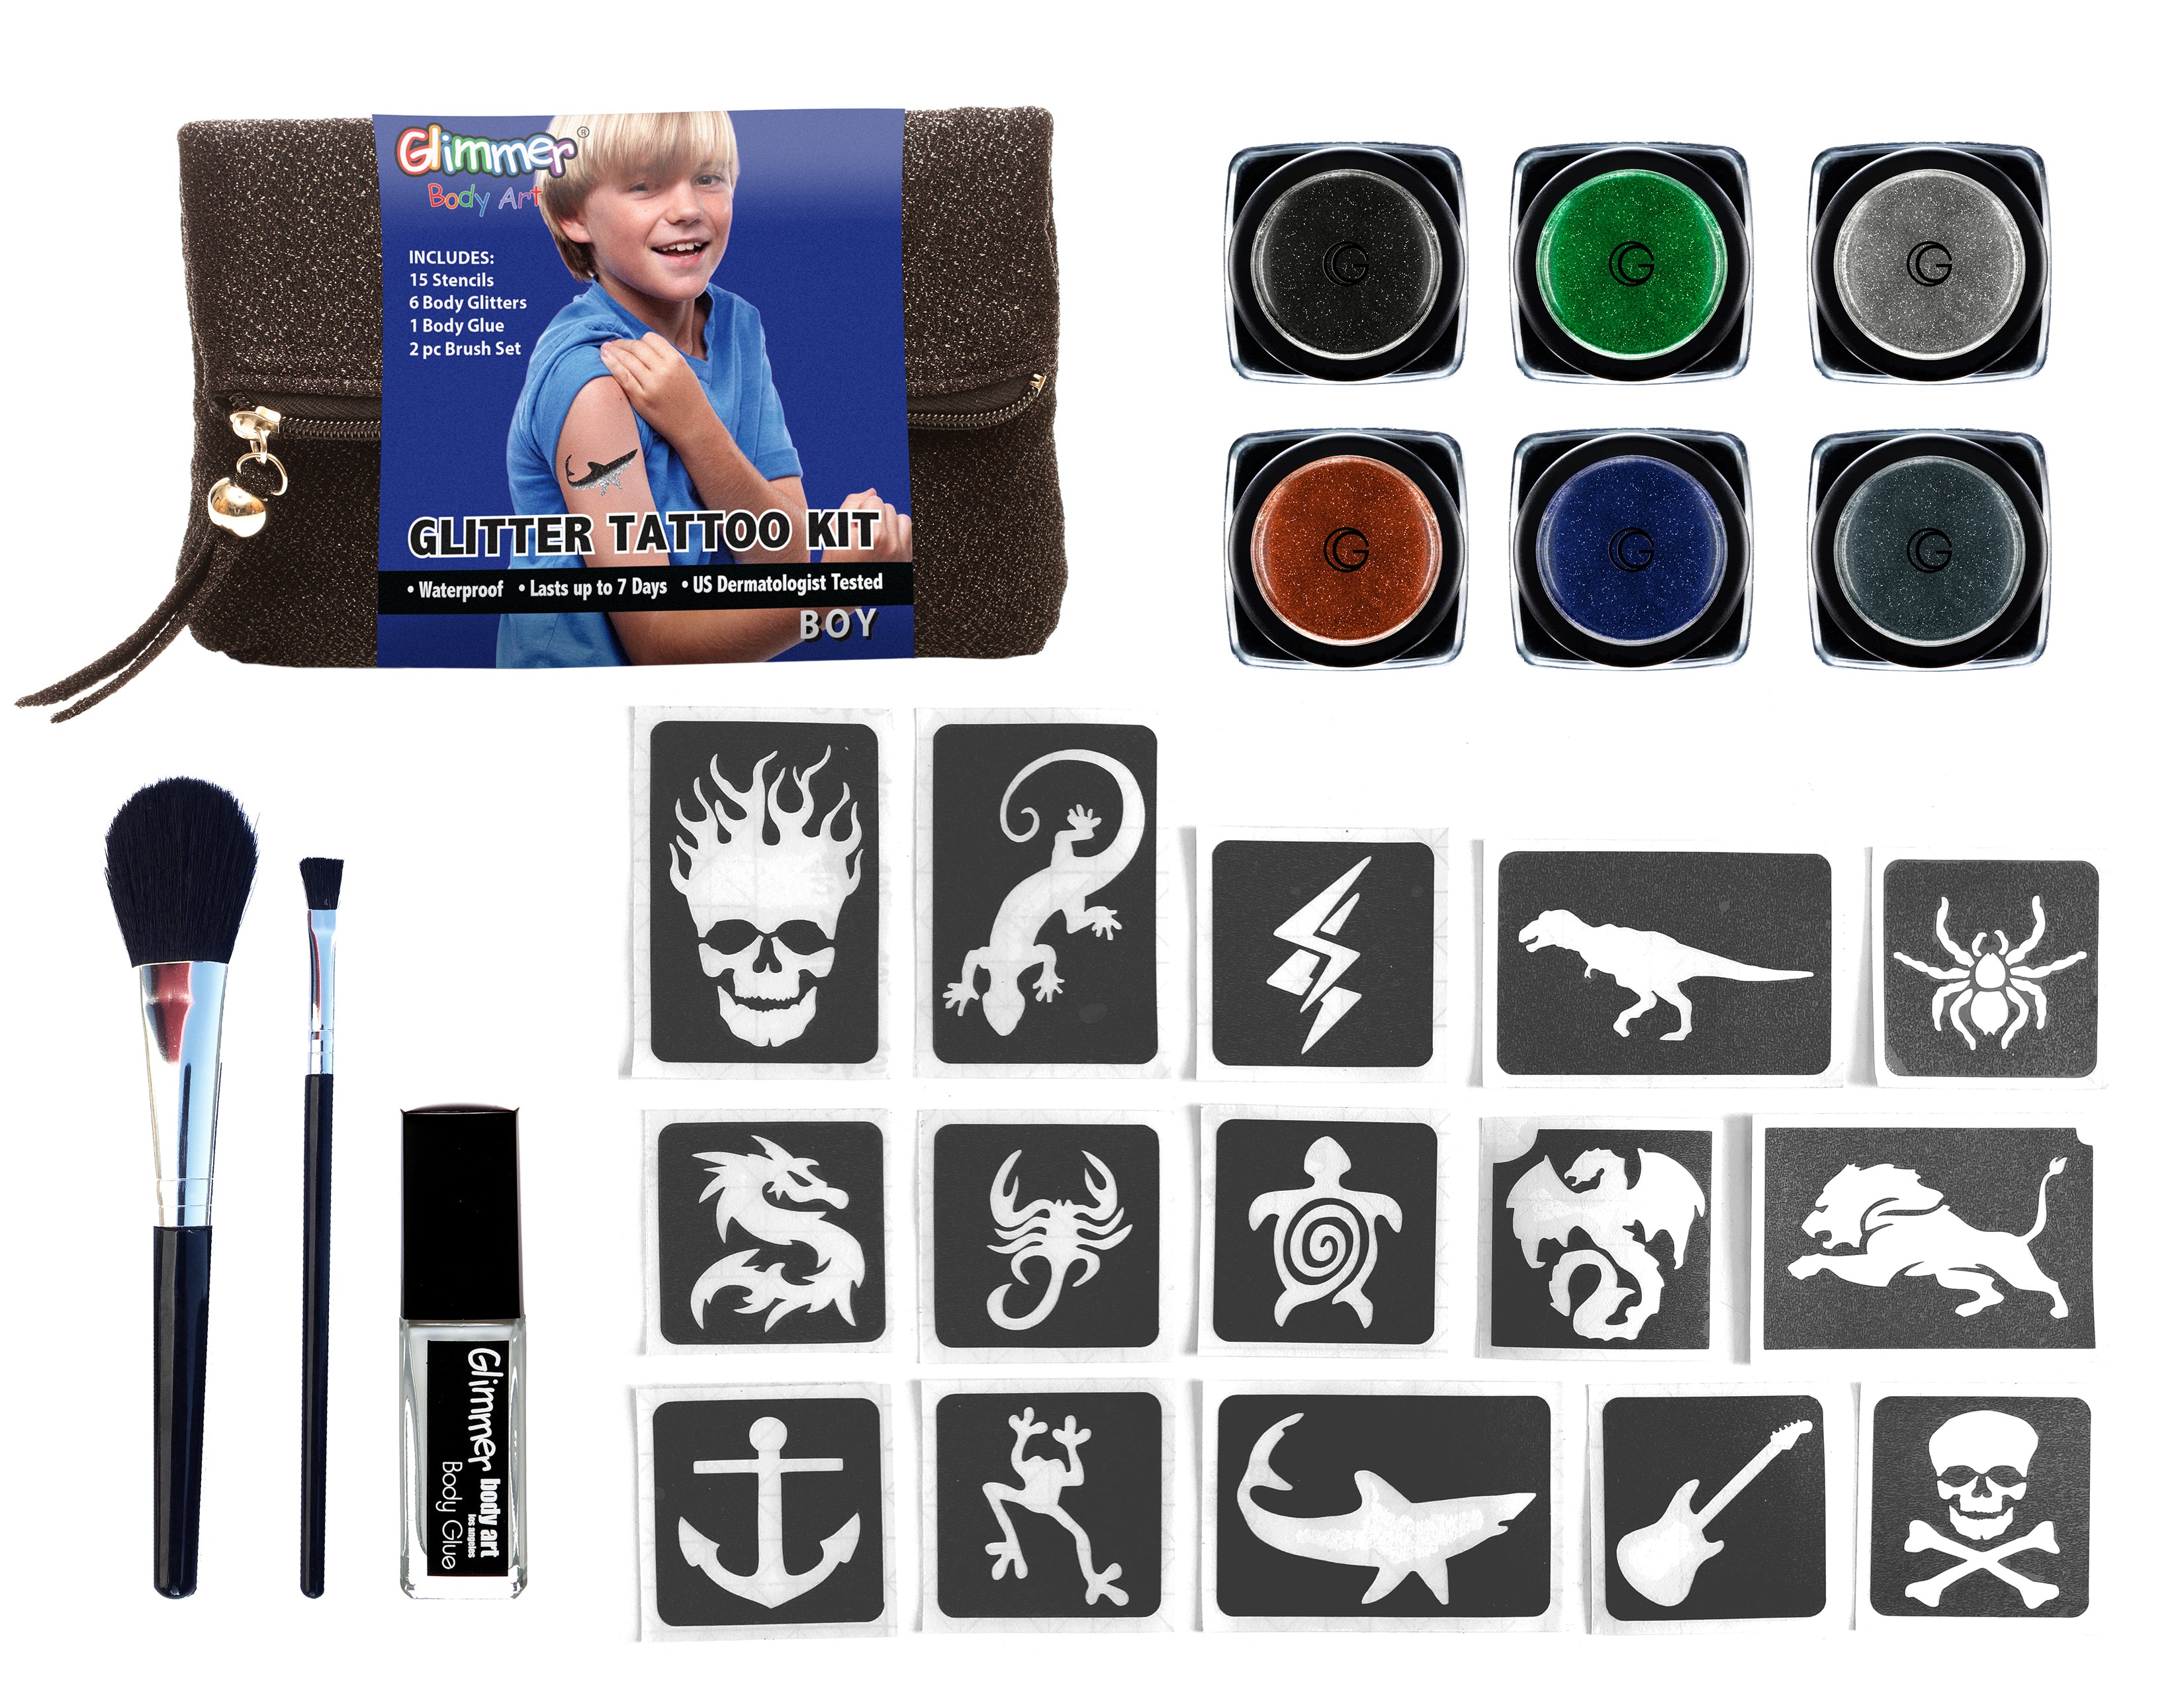 Ingang afvoer Gewoon Glimmer to Go Kit Party Set - Glimmer Body Art